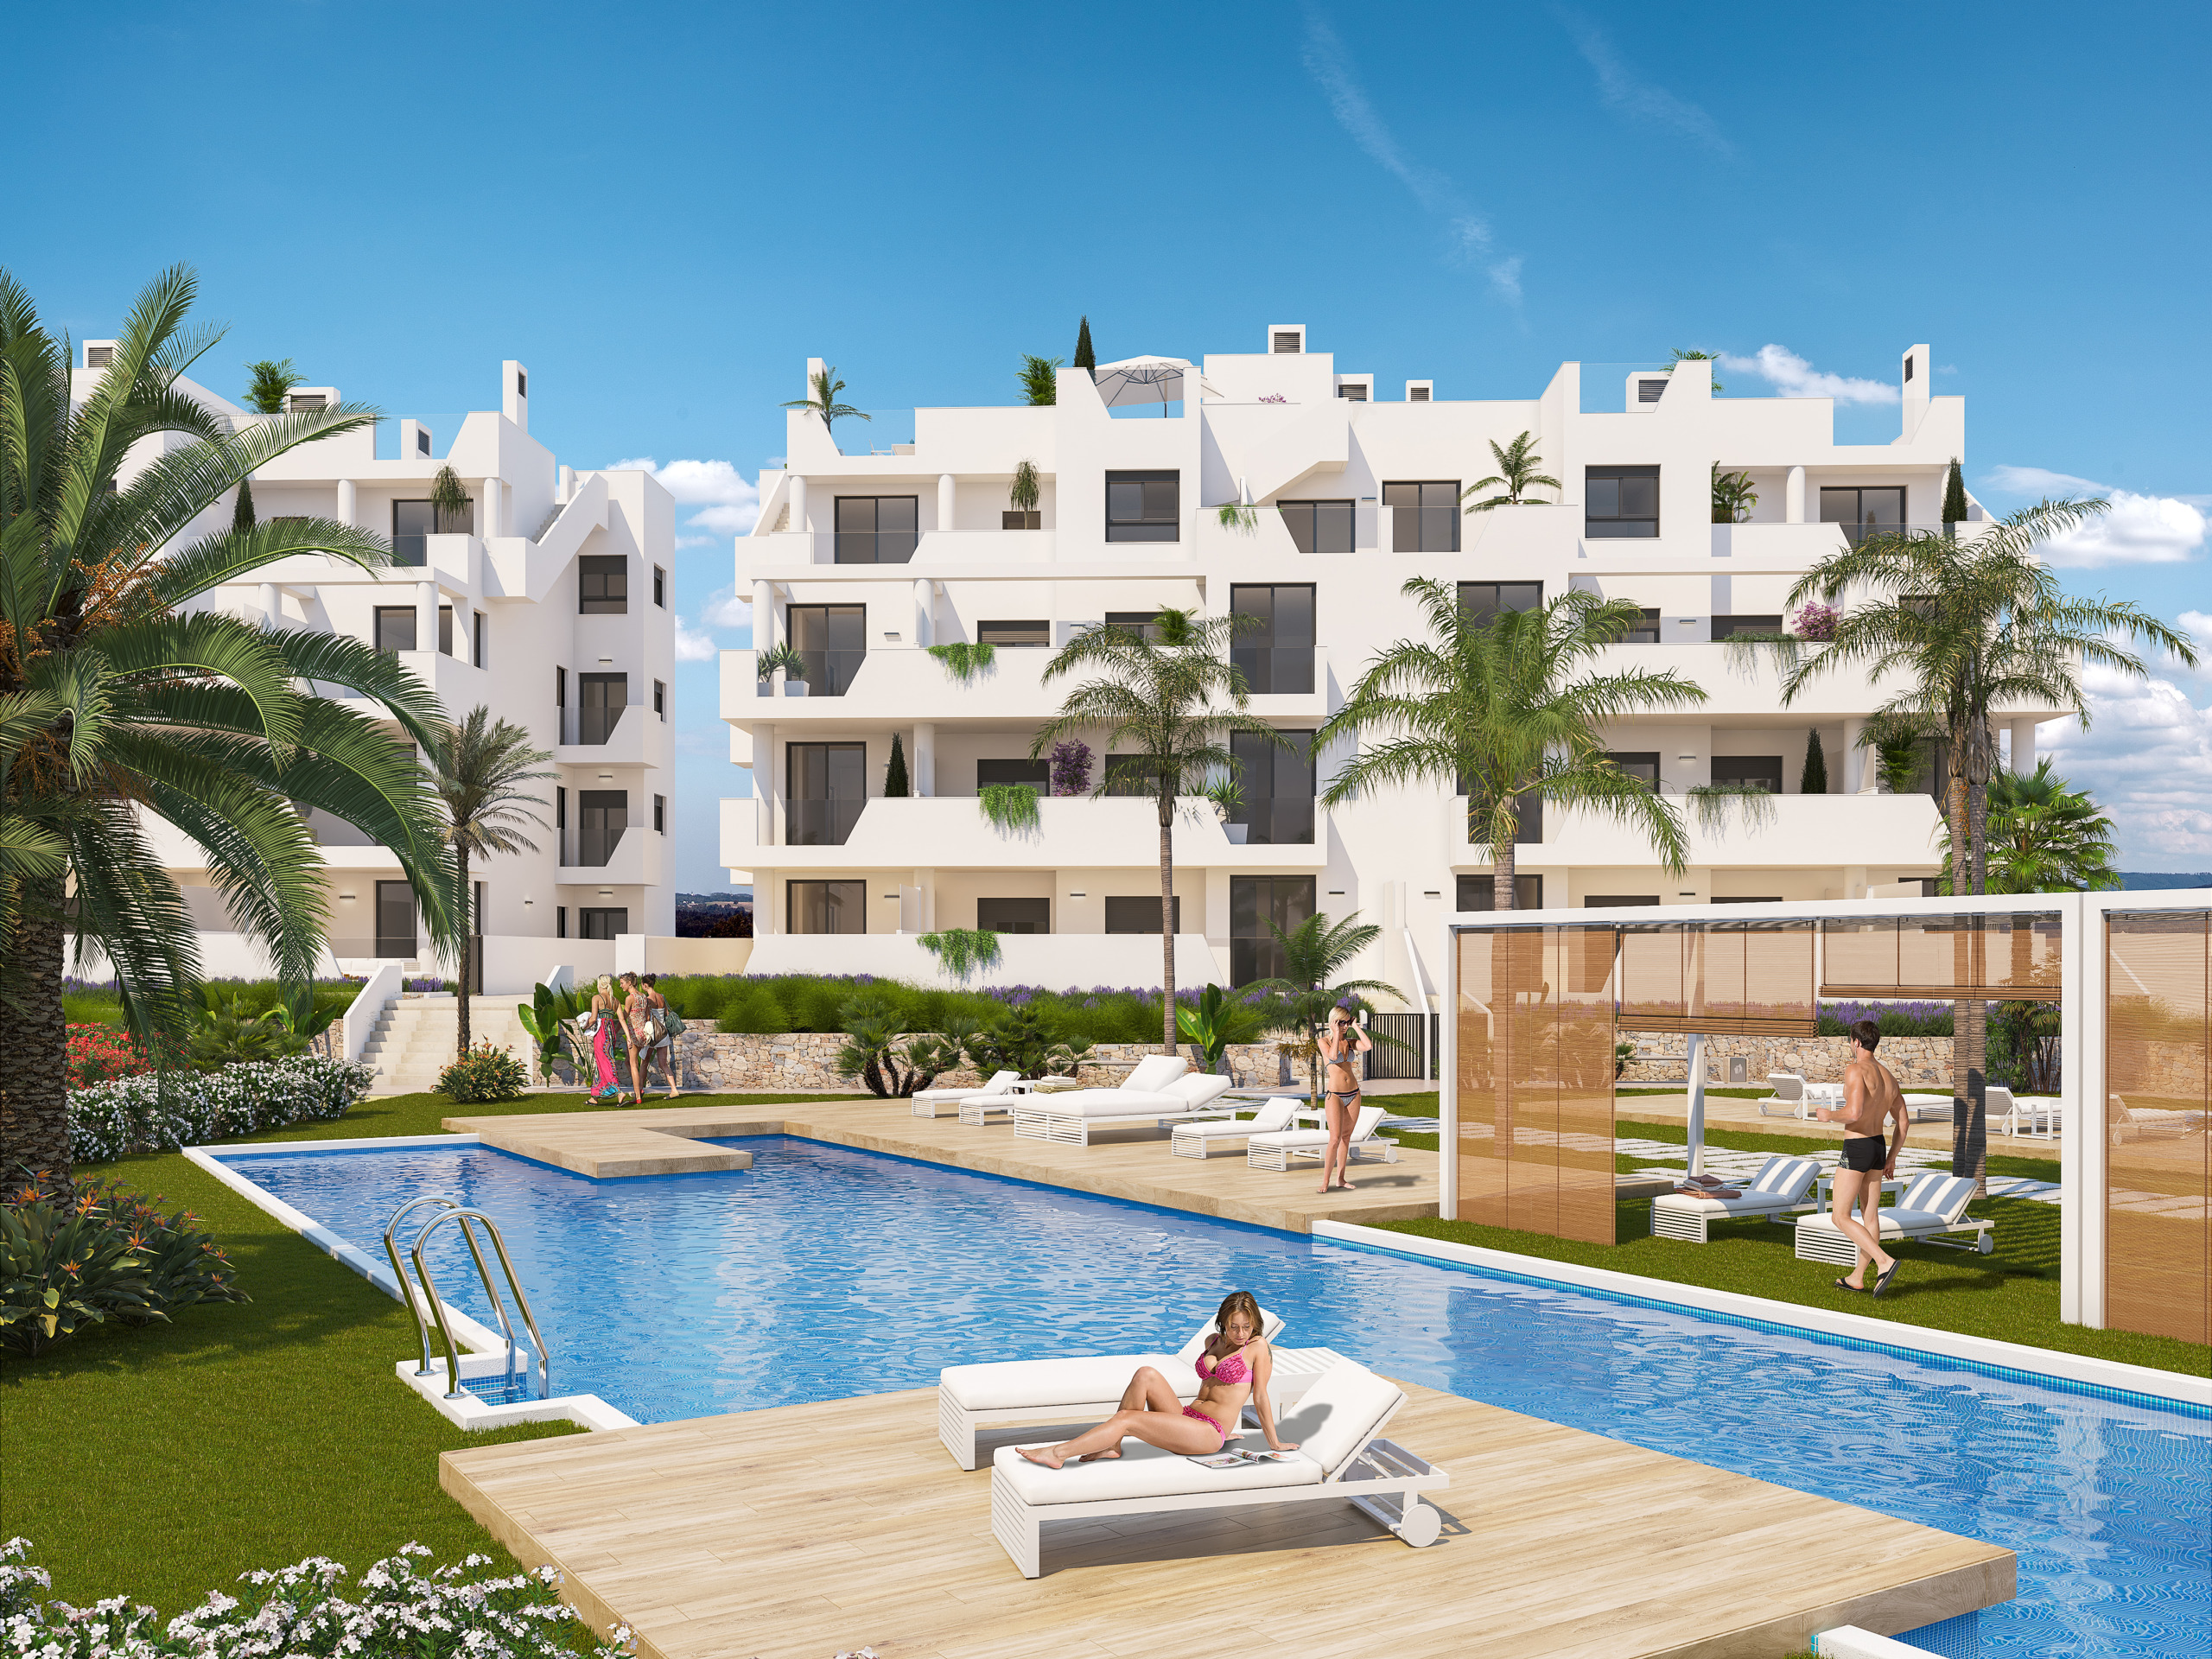 Apartments with communal pool and heated pool in Santa Rosalía Resort